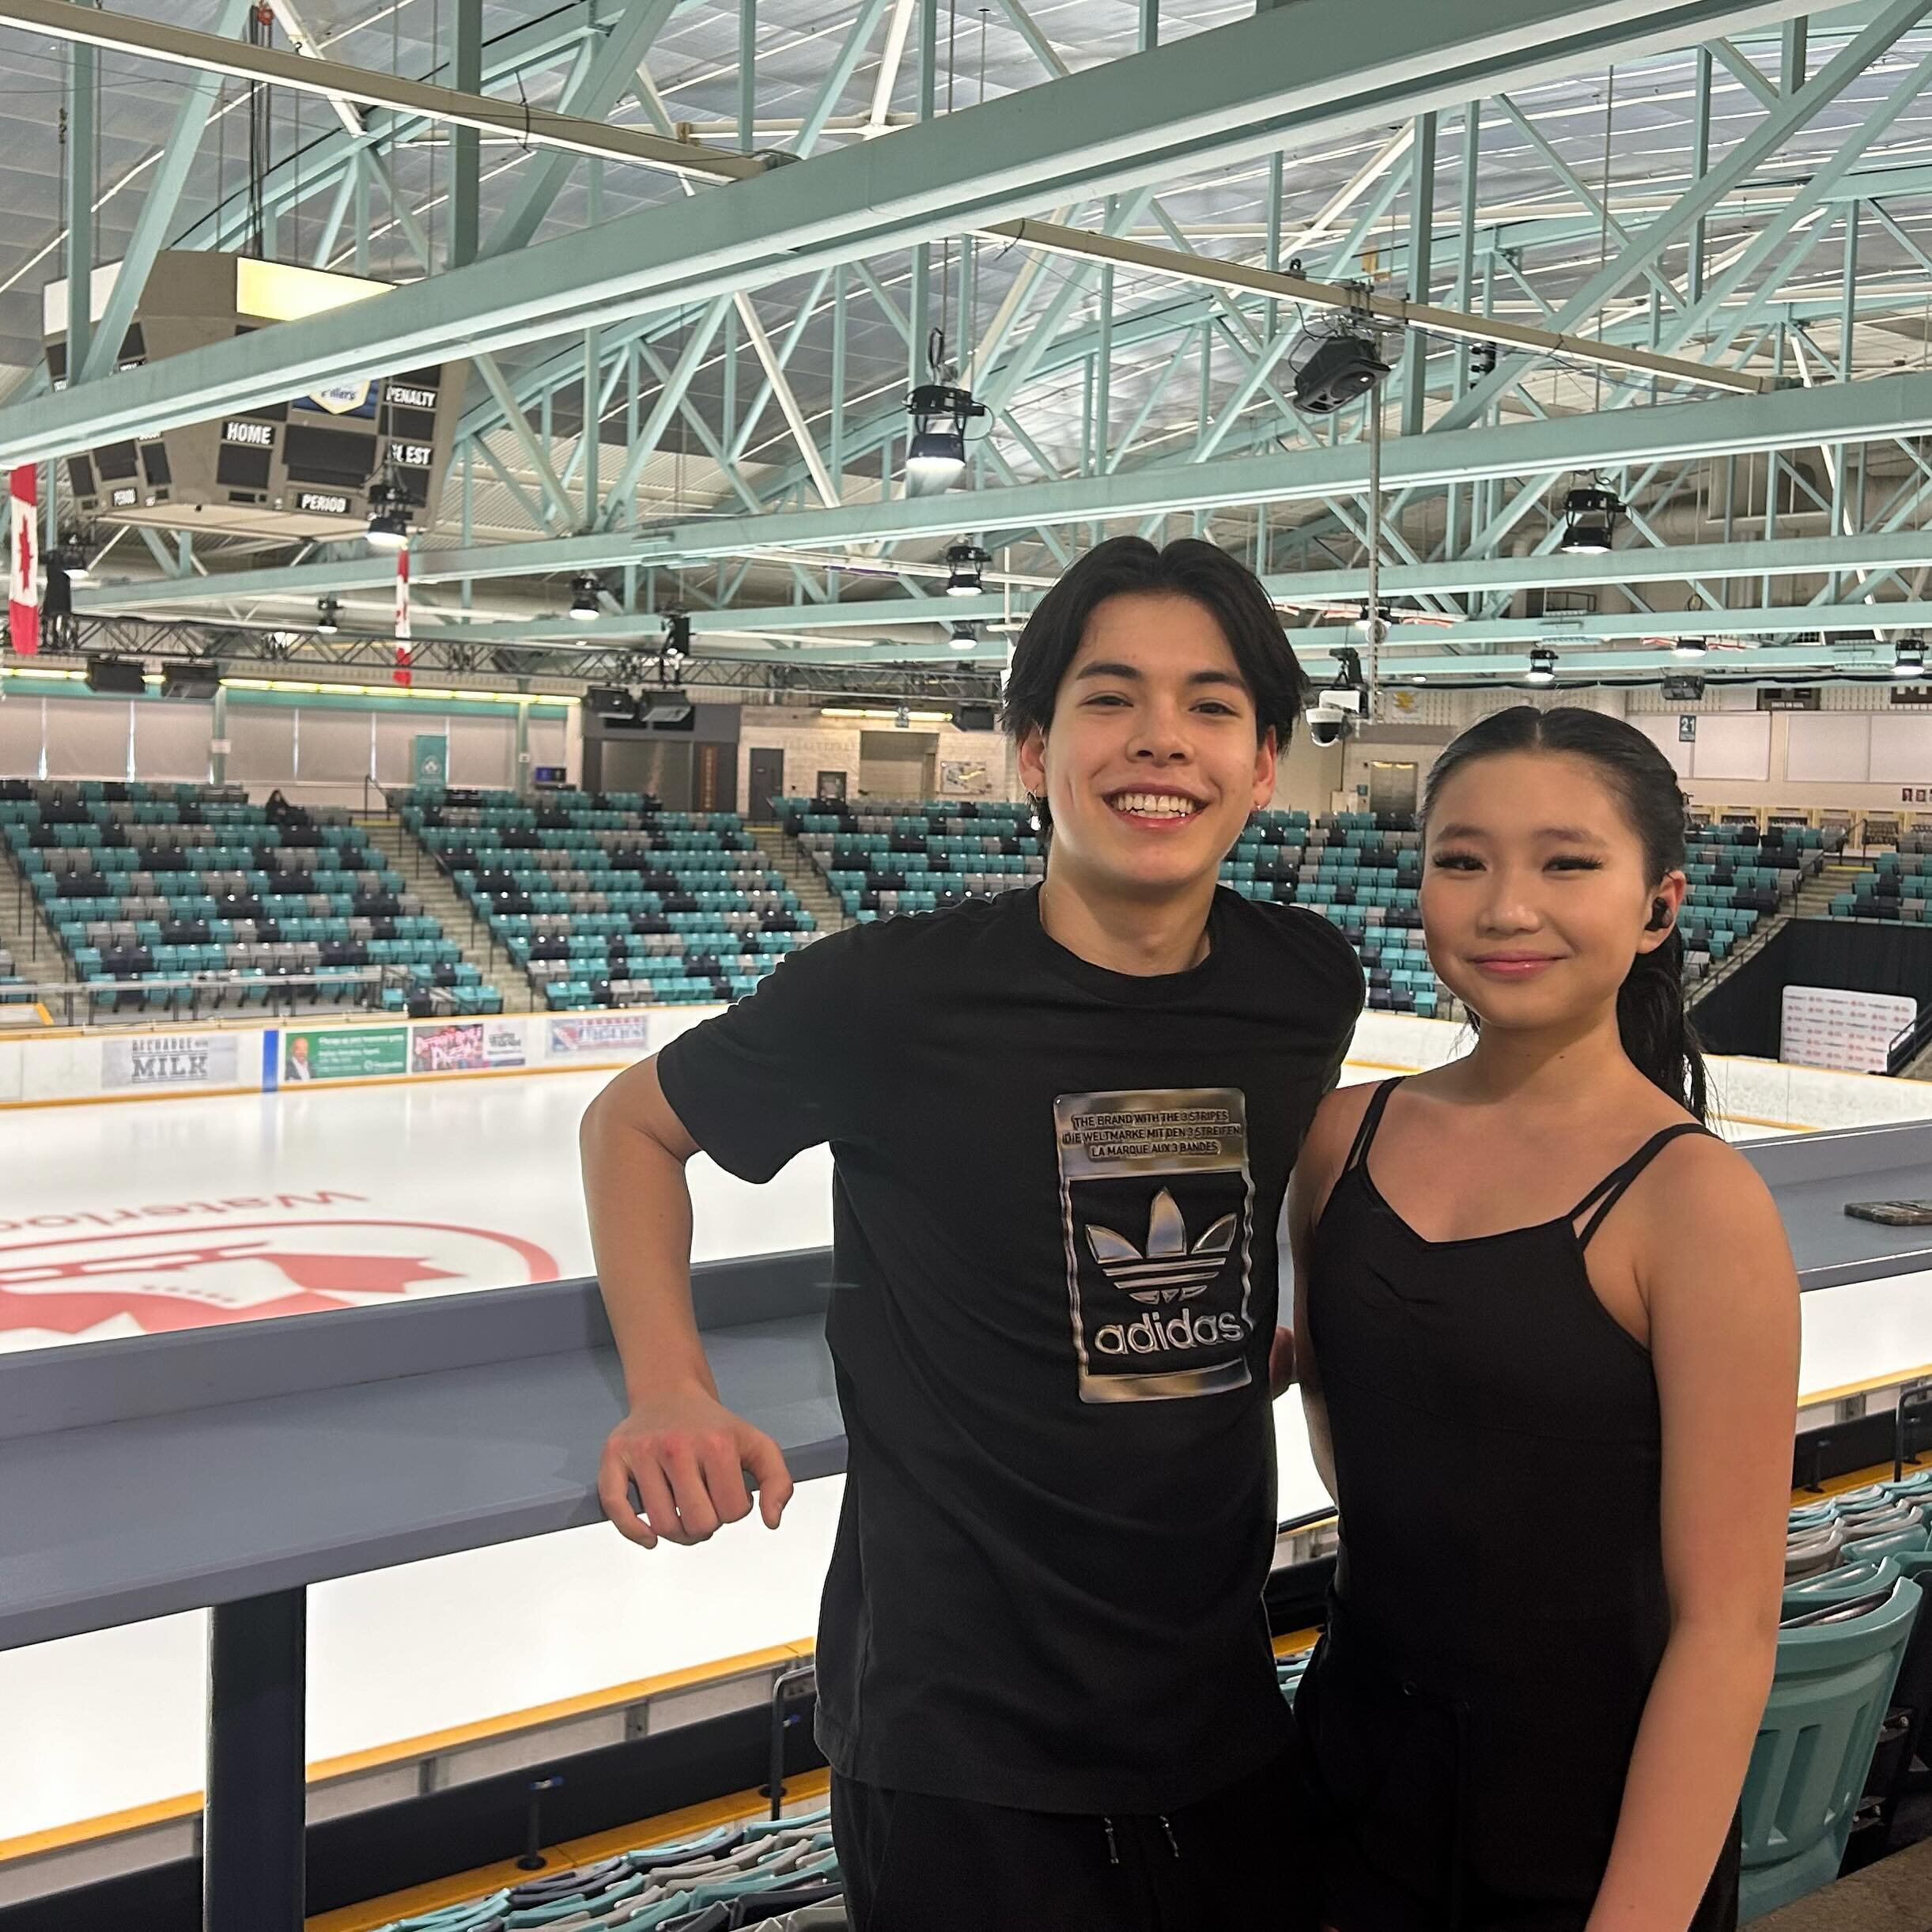 Good Luck Tasha and Mickey. First day of practices at Skate Canada Novice Nationals😀 #skatecanada #bcyksection #vancouvericedance